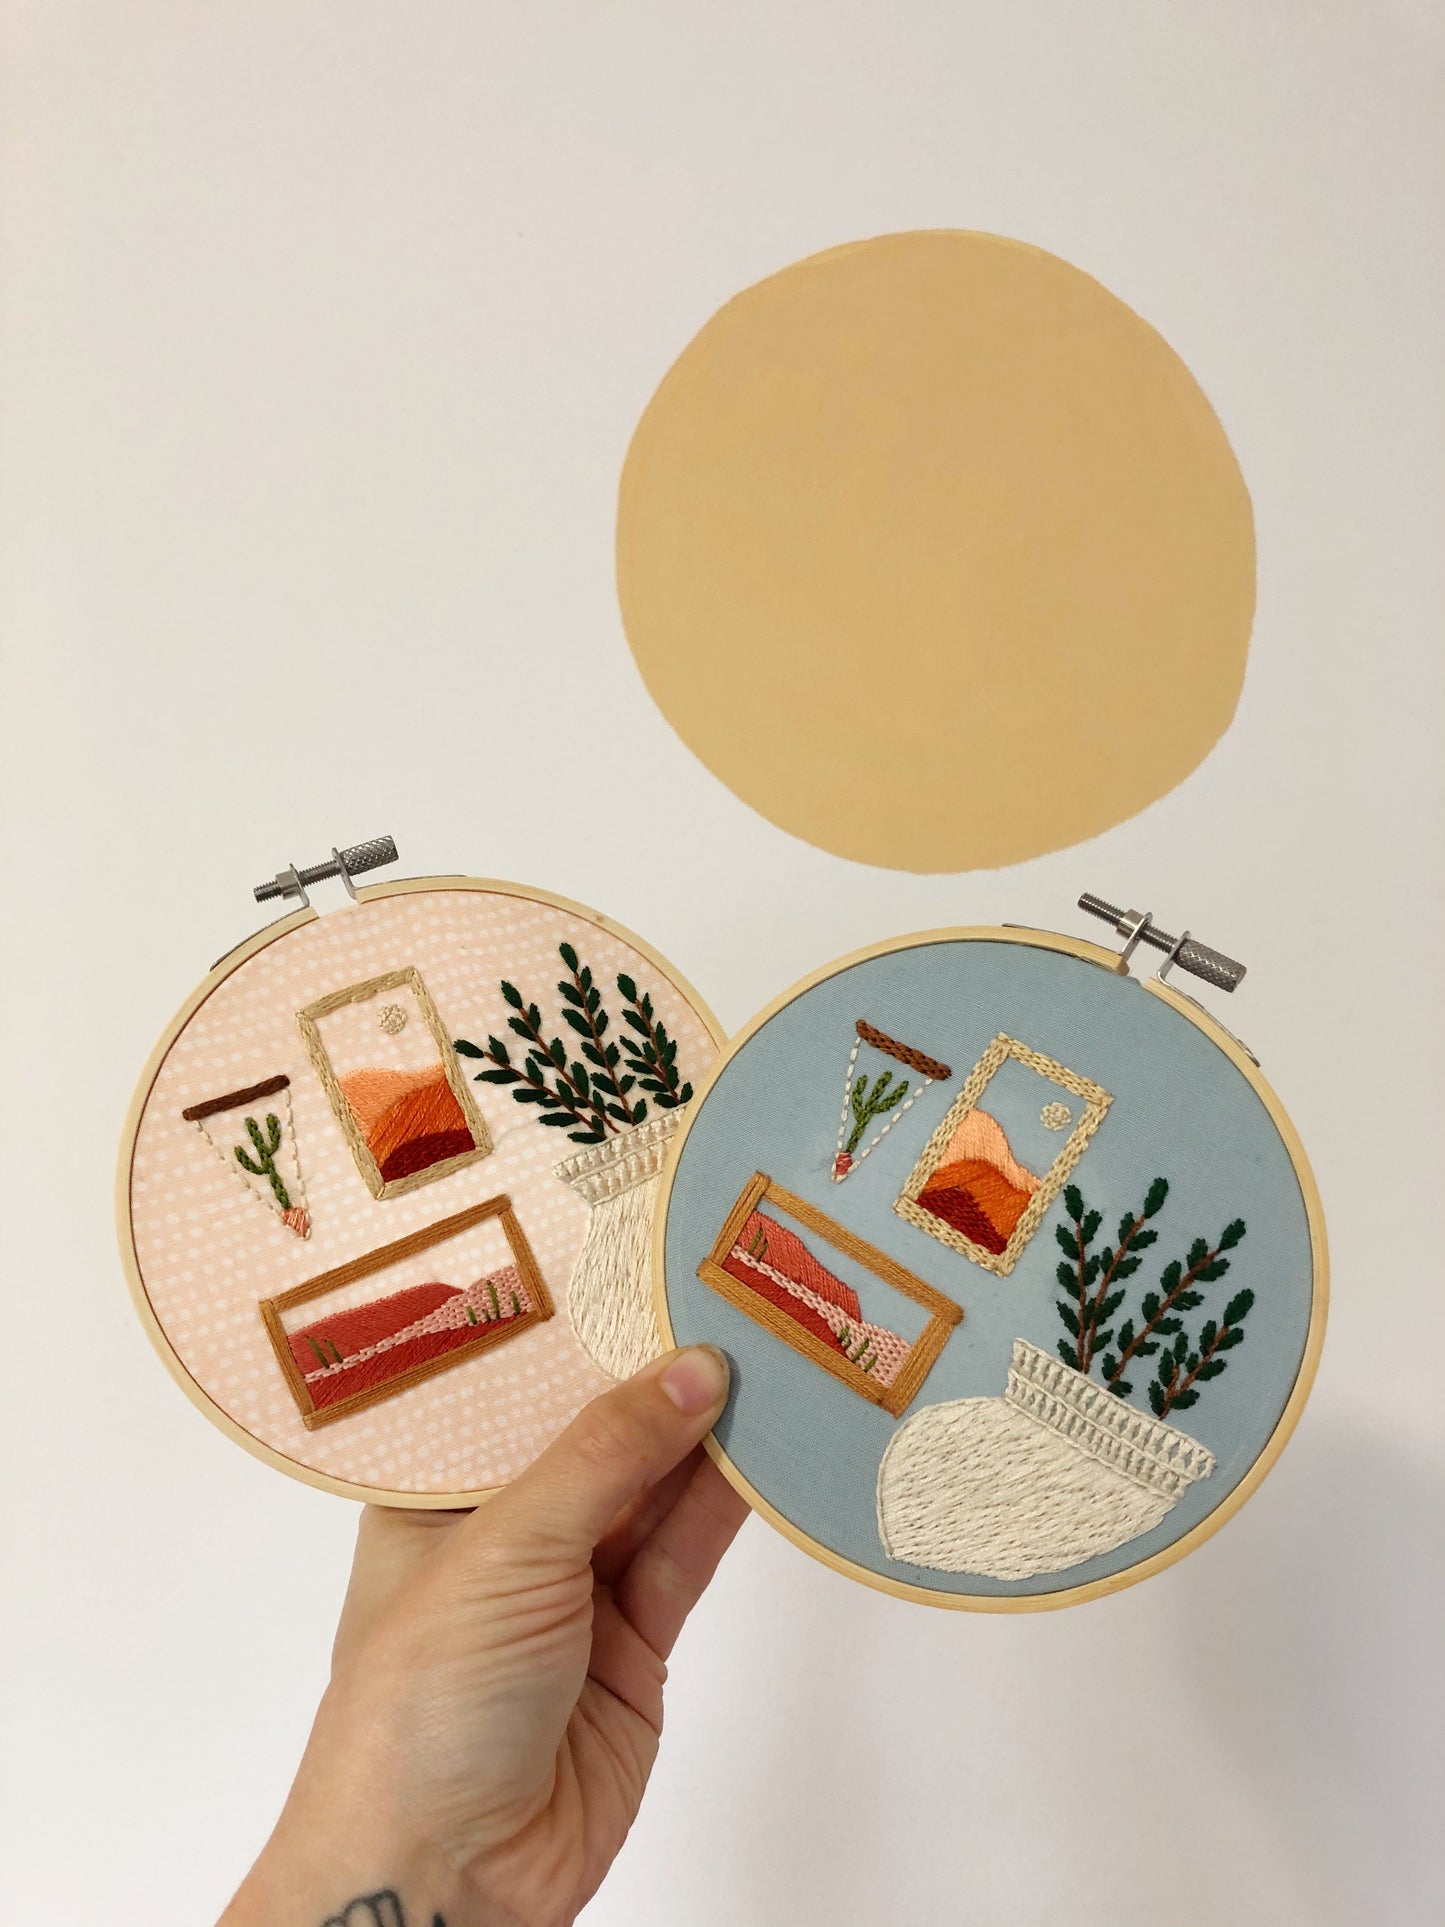 Gallery Wall - Beginner Hand Embroidery Pattern PDF